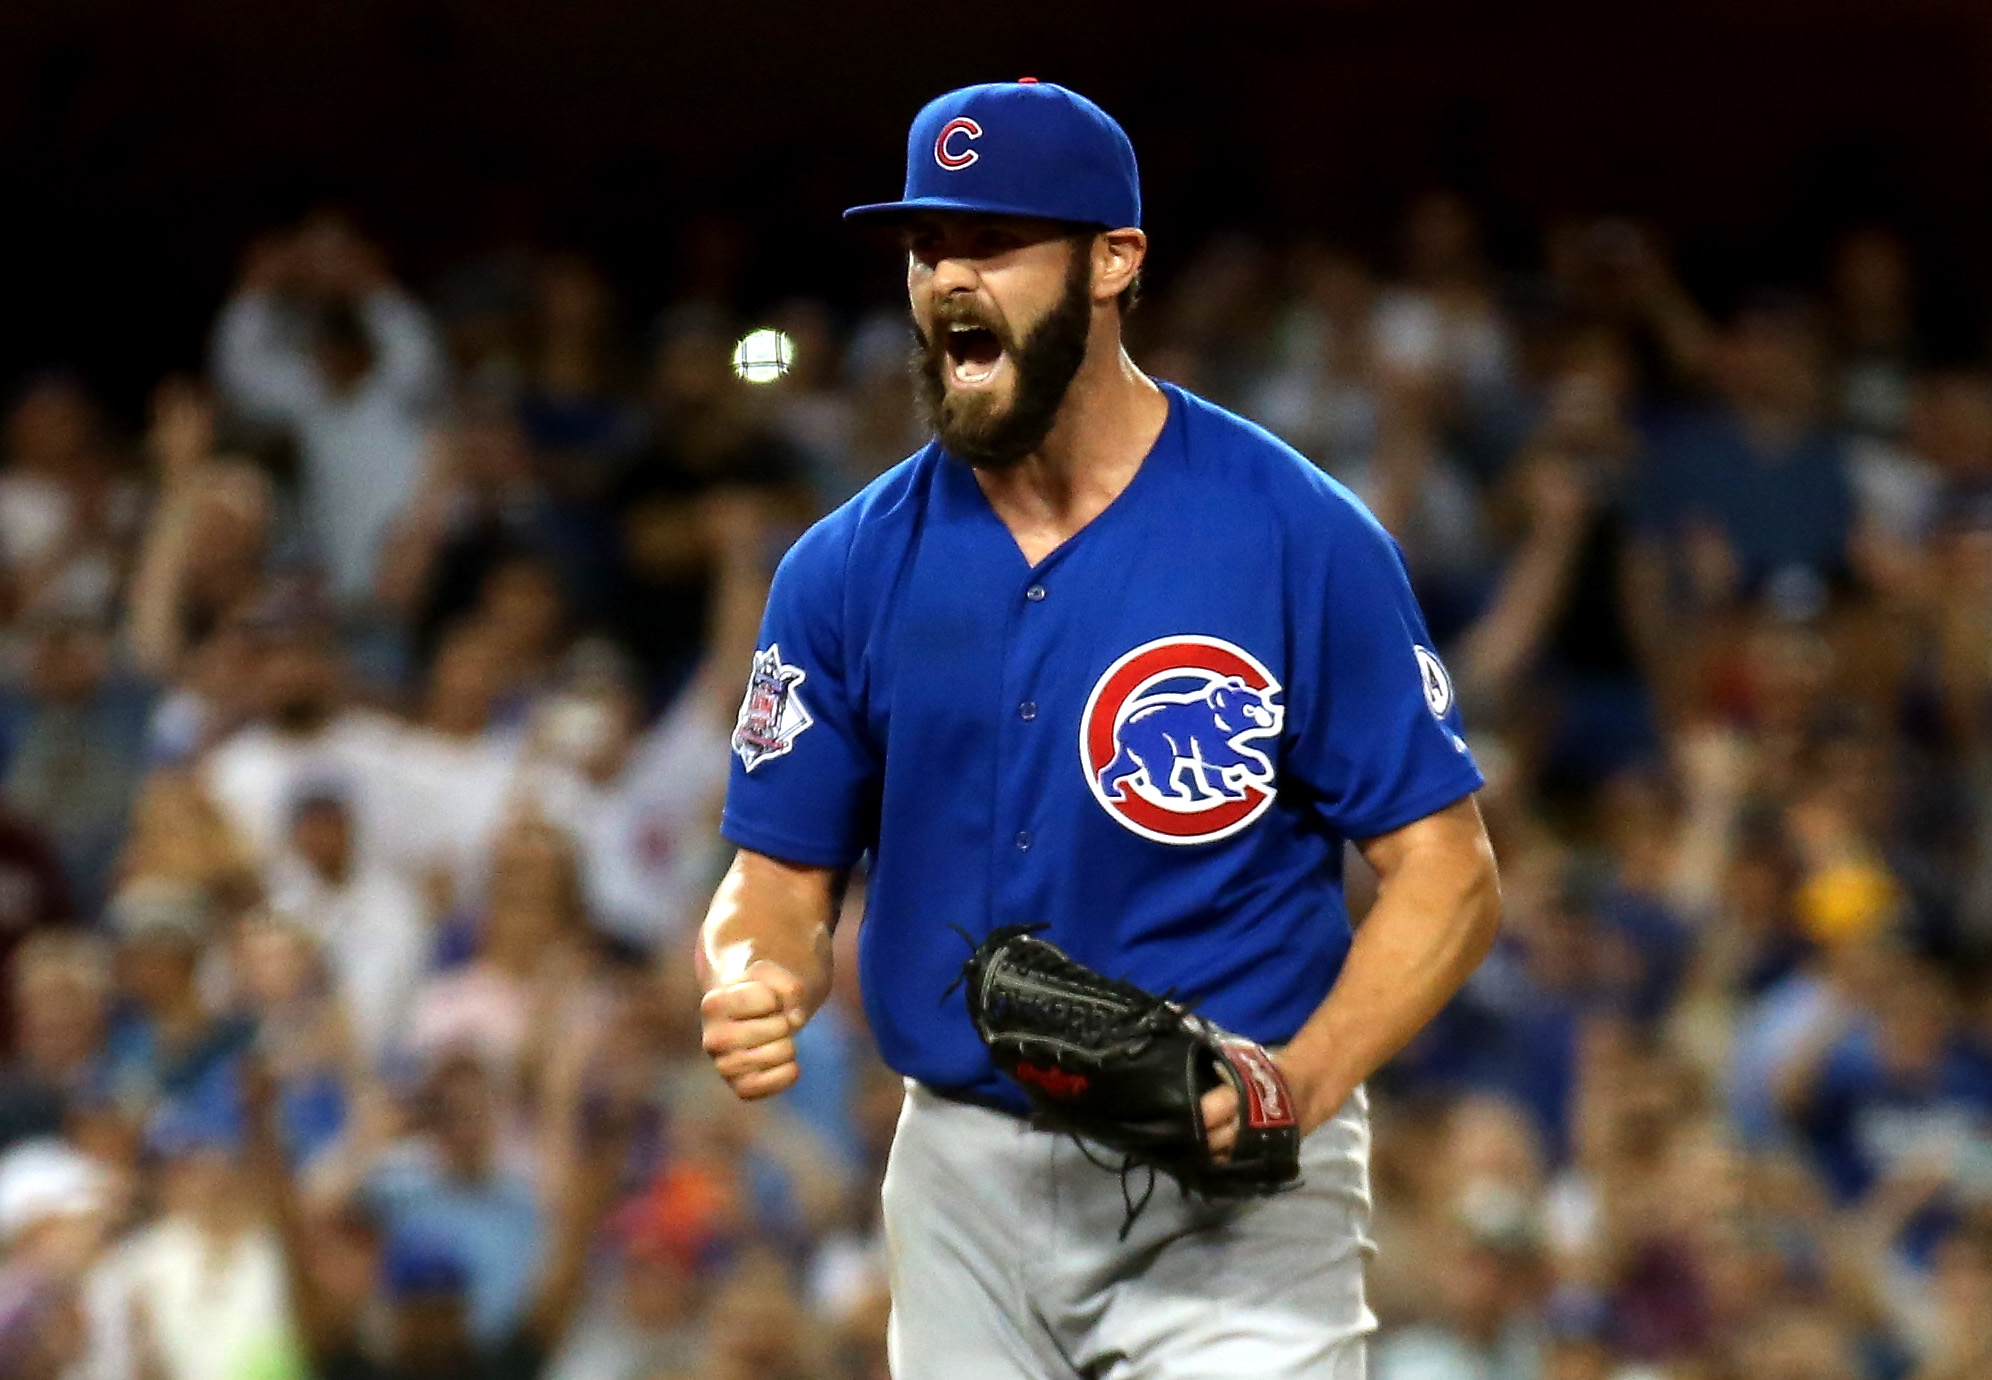 Cubs ace Jake Arrieta laughs off talk PEDs fueled turnaround